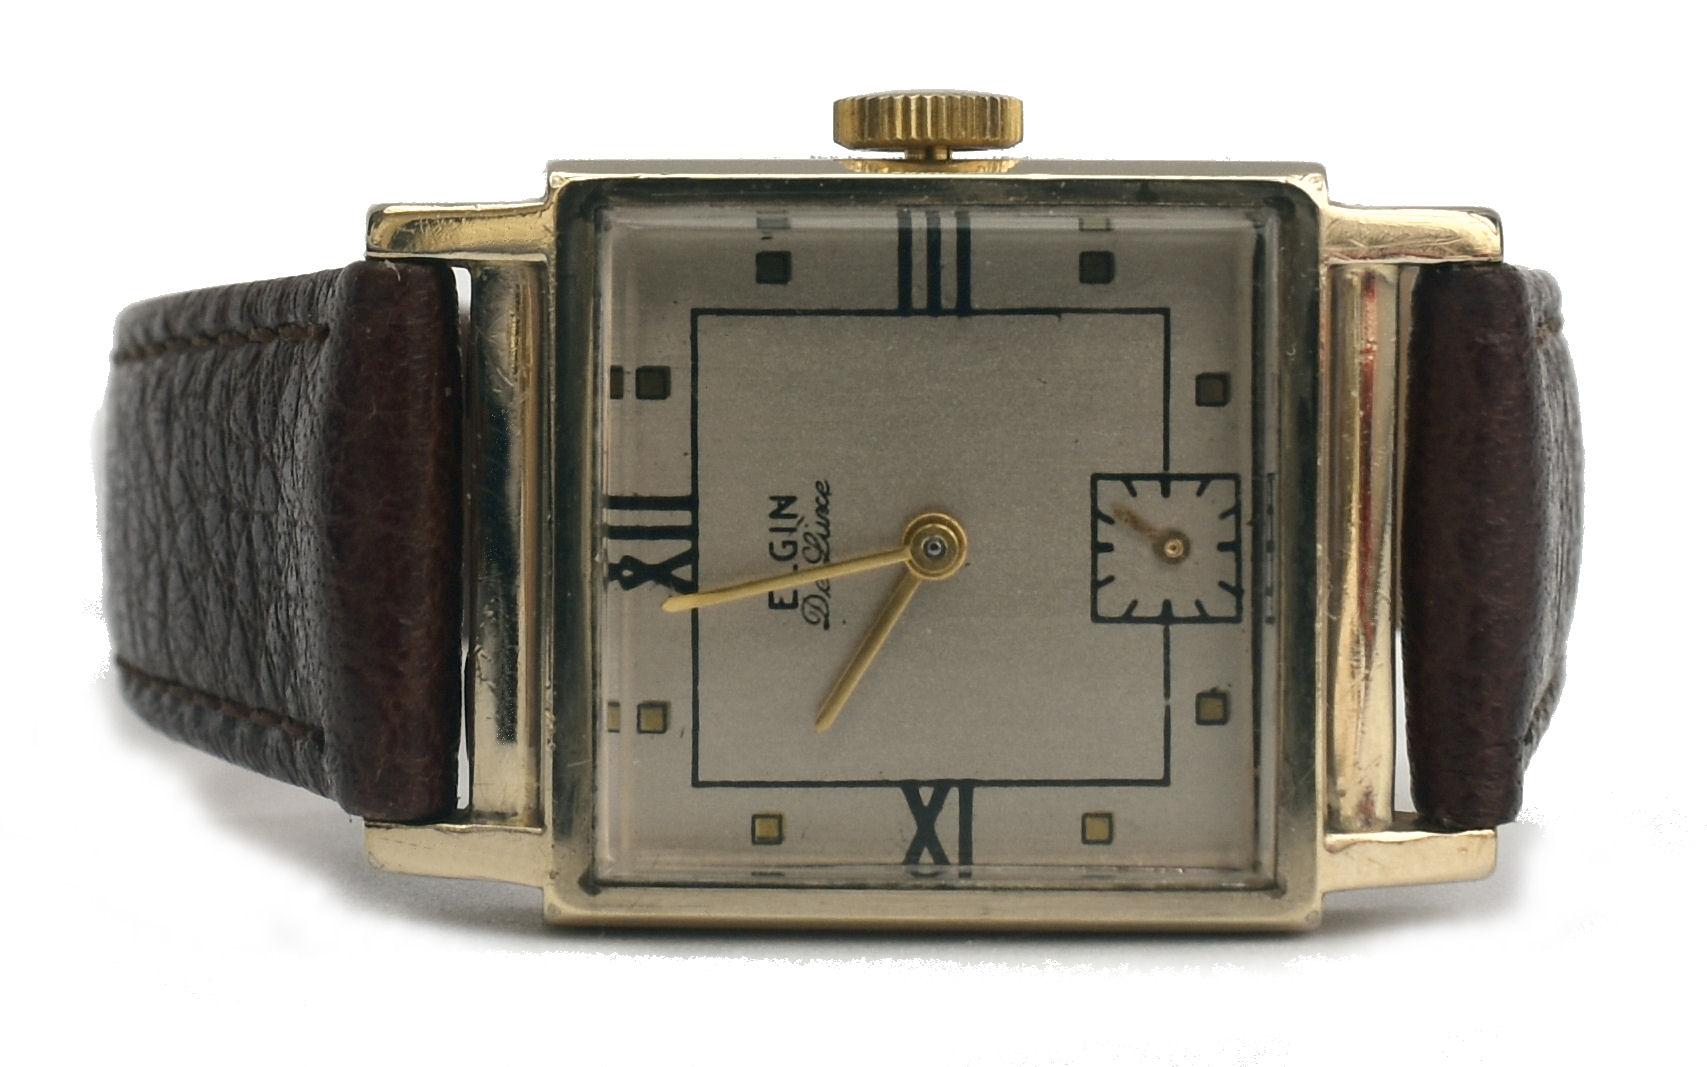 For your consideration is this very stylish gents 10k Gold filled manual wristwatch made by the American watchmakers Elgin, dates to 1946. Square case is 10k gold filled top and back in great condition. Silver dial is also very clean. Elgin 17 jewel